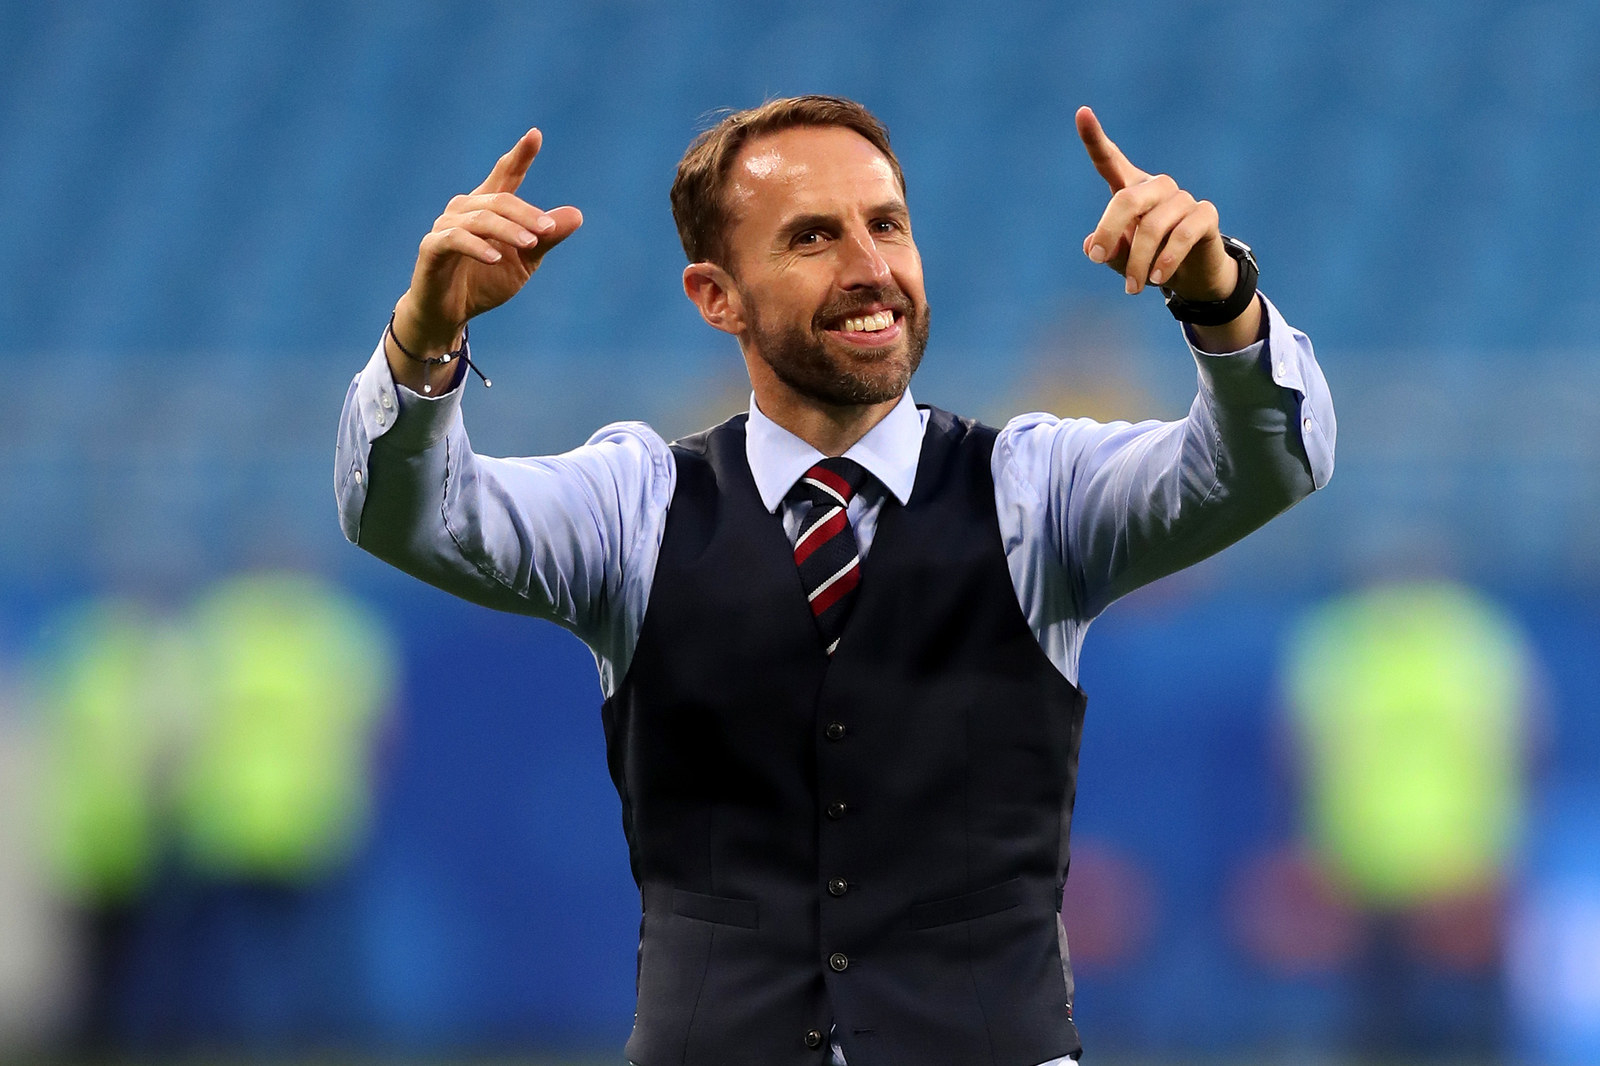  Gareth Southgate, the manager of the England football team, is pictured in a suit and tie celebrating a goal.